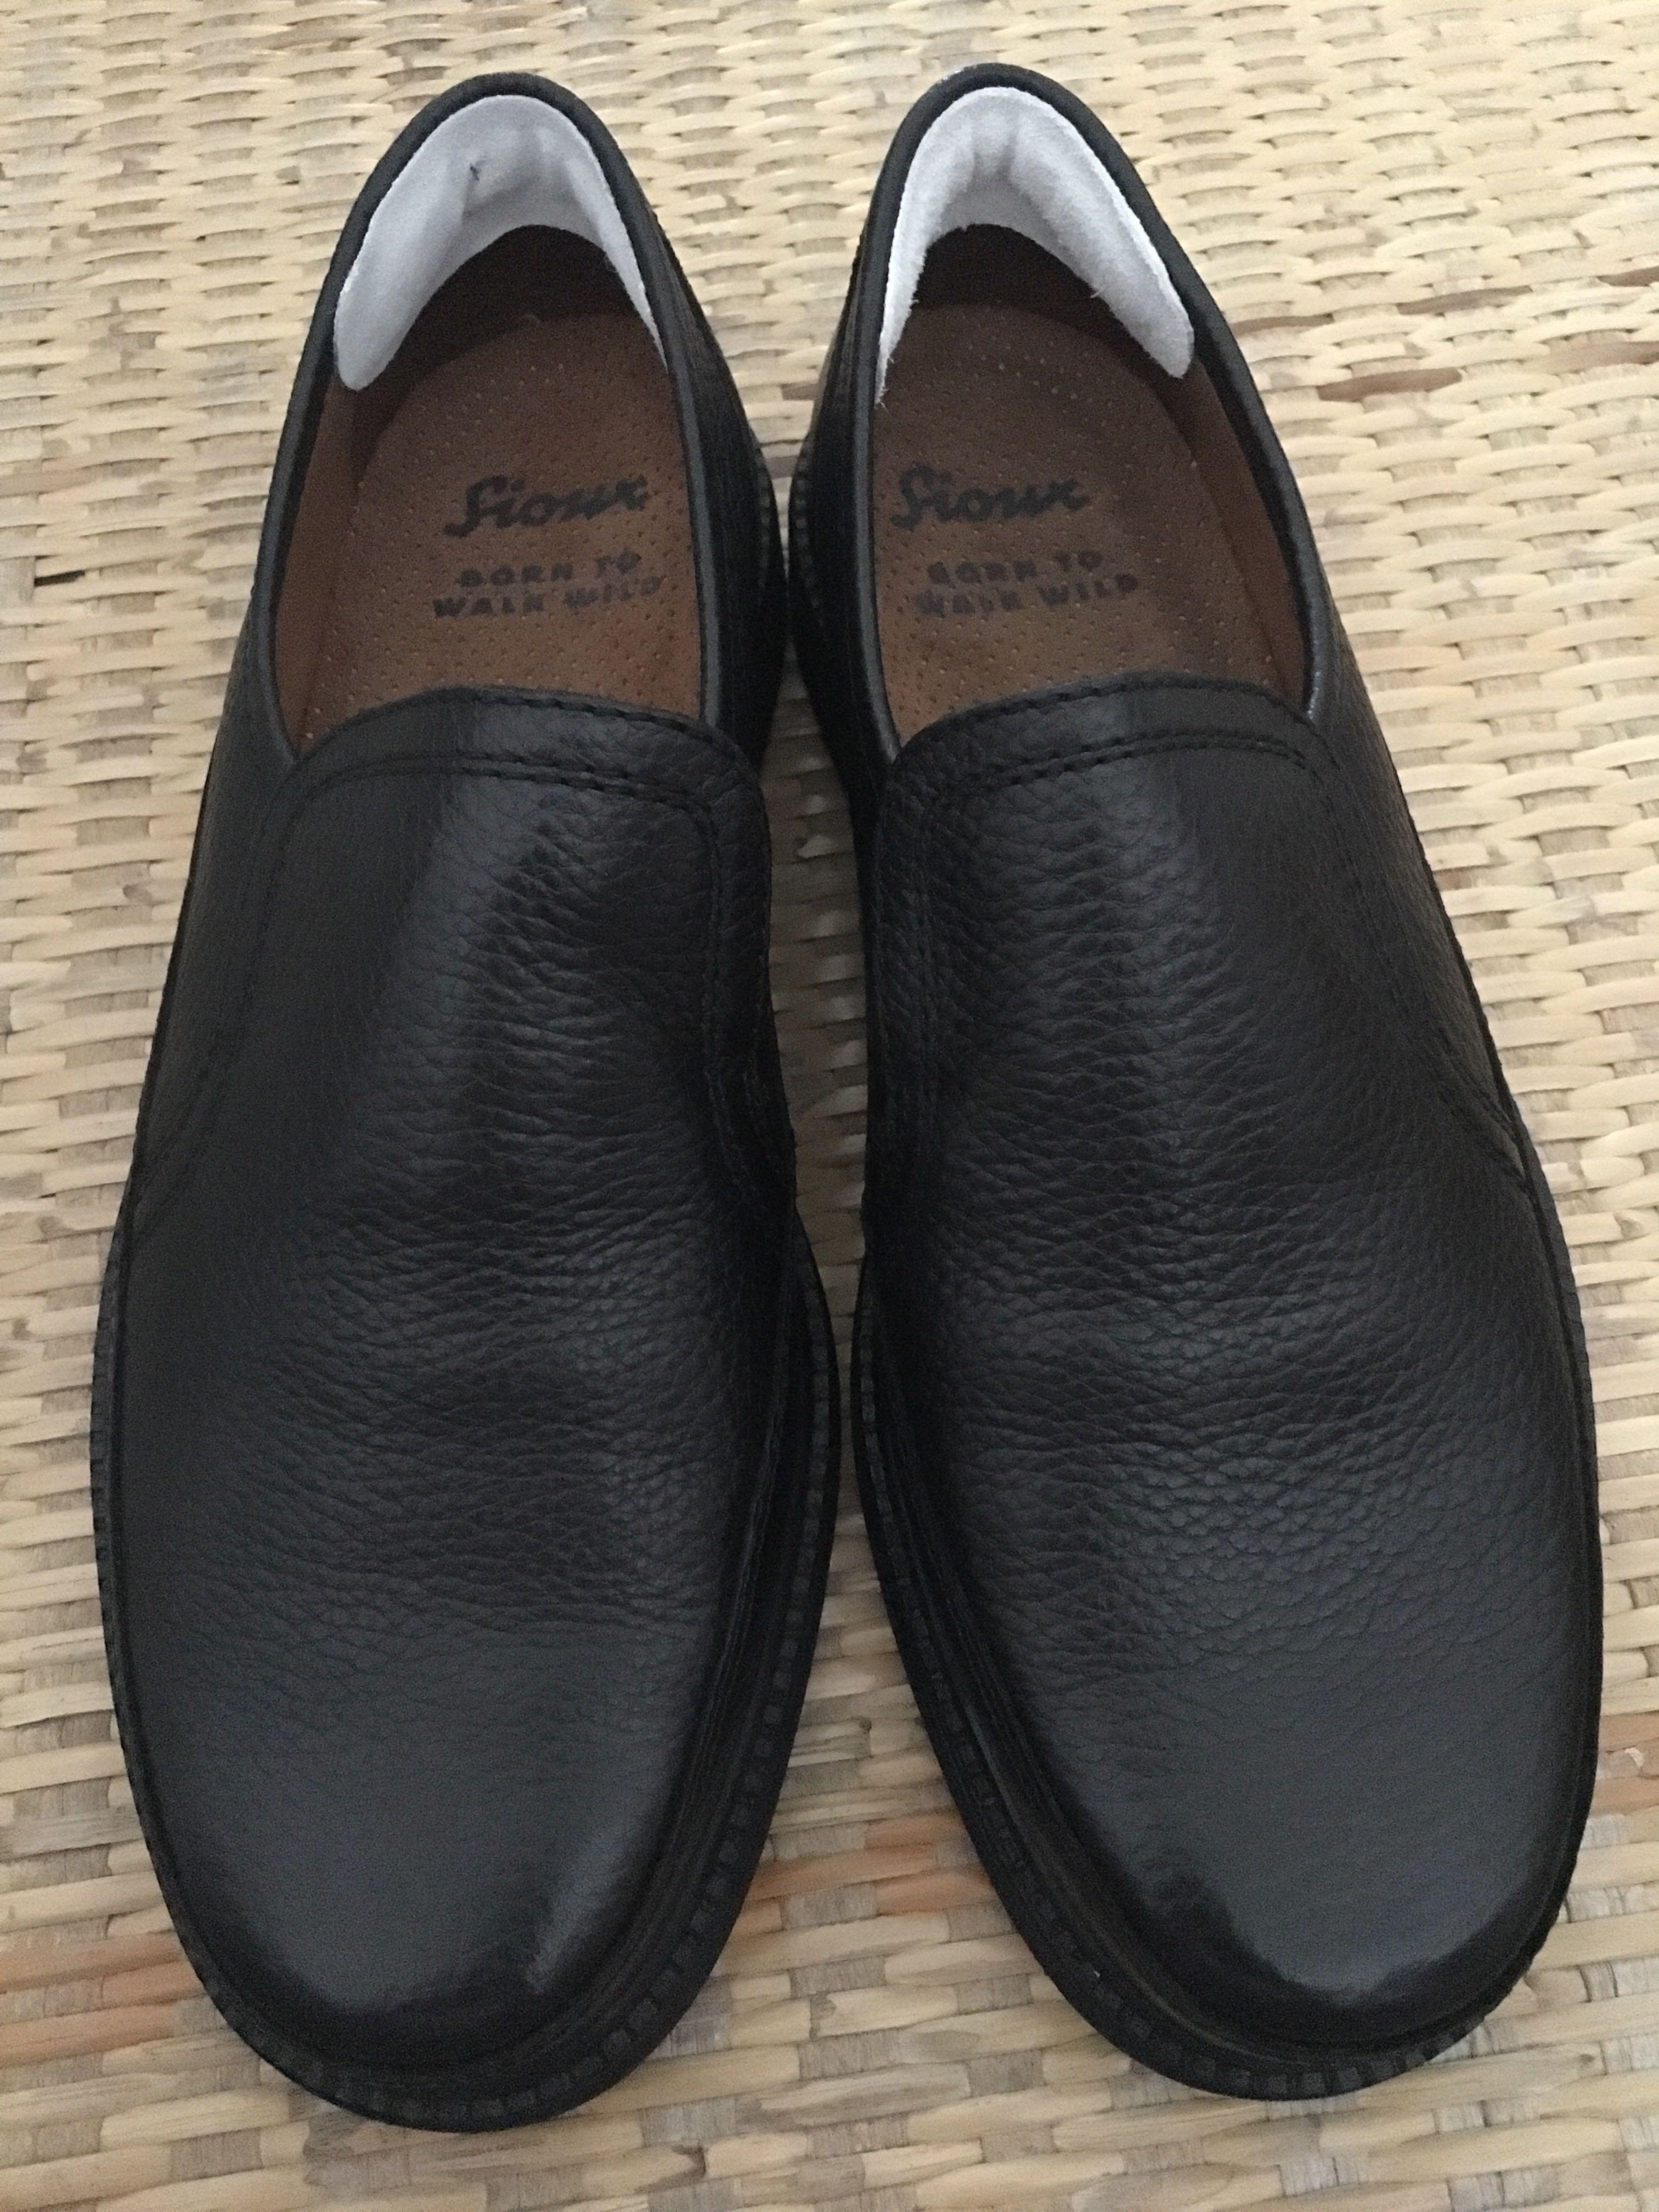 Original Brand New SIOUX Born to Walk Wild Leather Shoes - Size 8 1/2,  Men's Fashion, Footwear, Dress shoes on Carousell